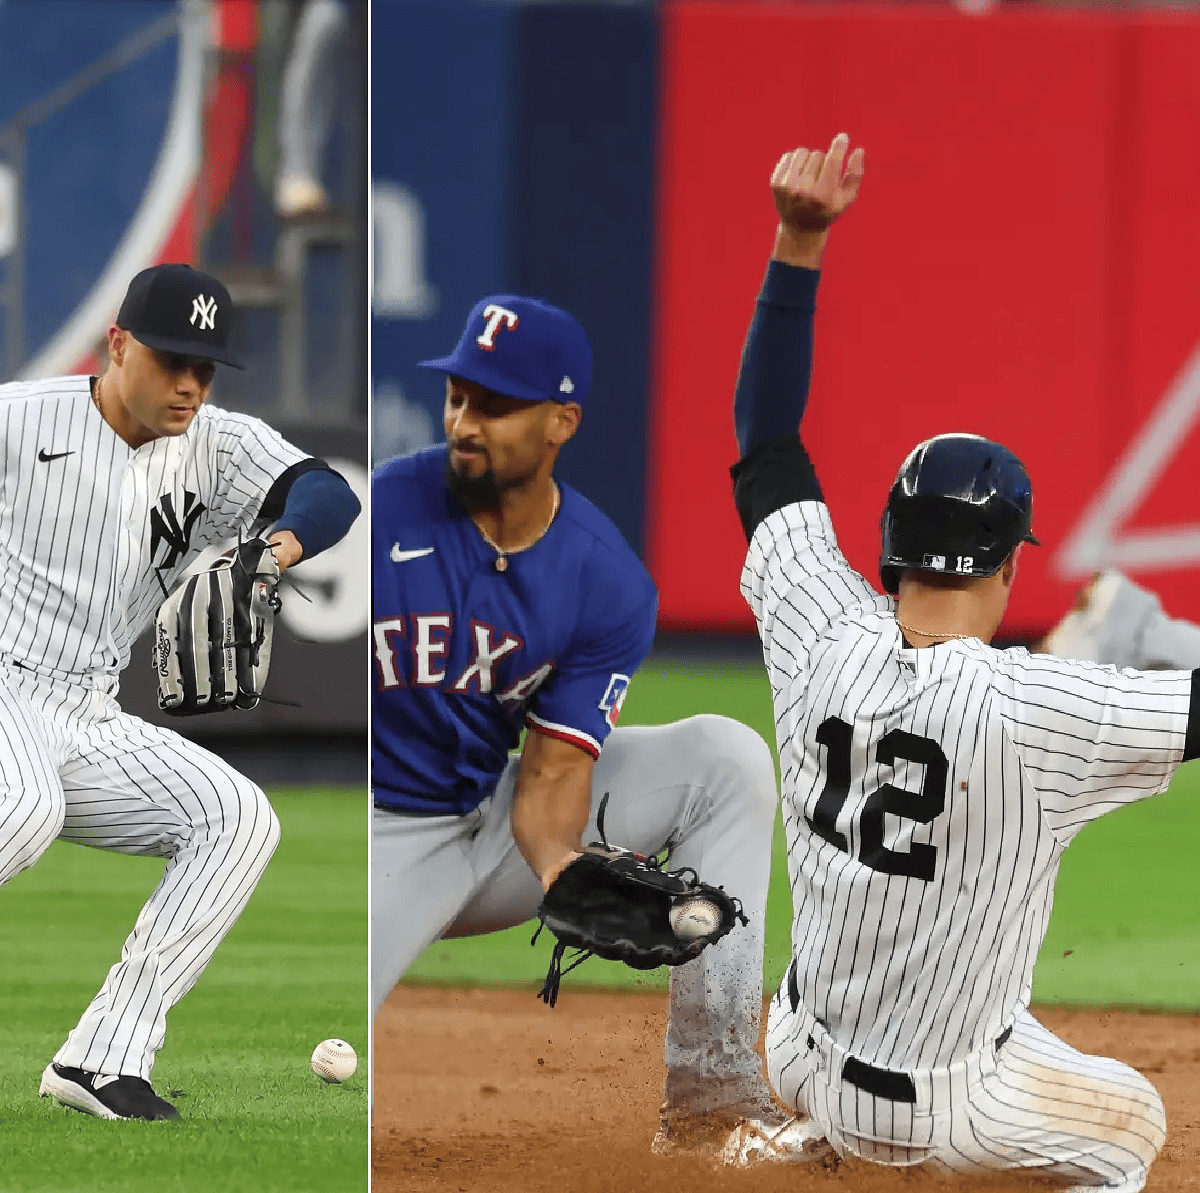 Yankees are actually doing the unthinkable with Isiah Kiner-Falefa